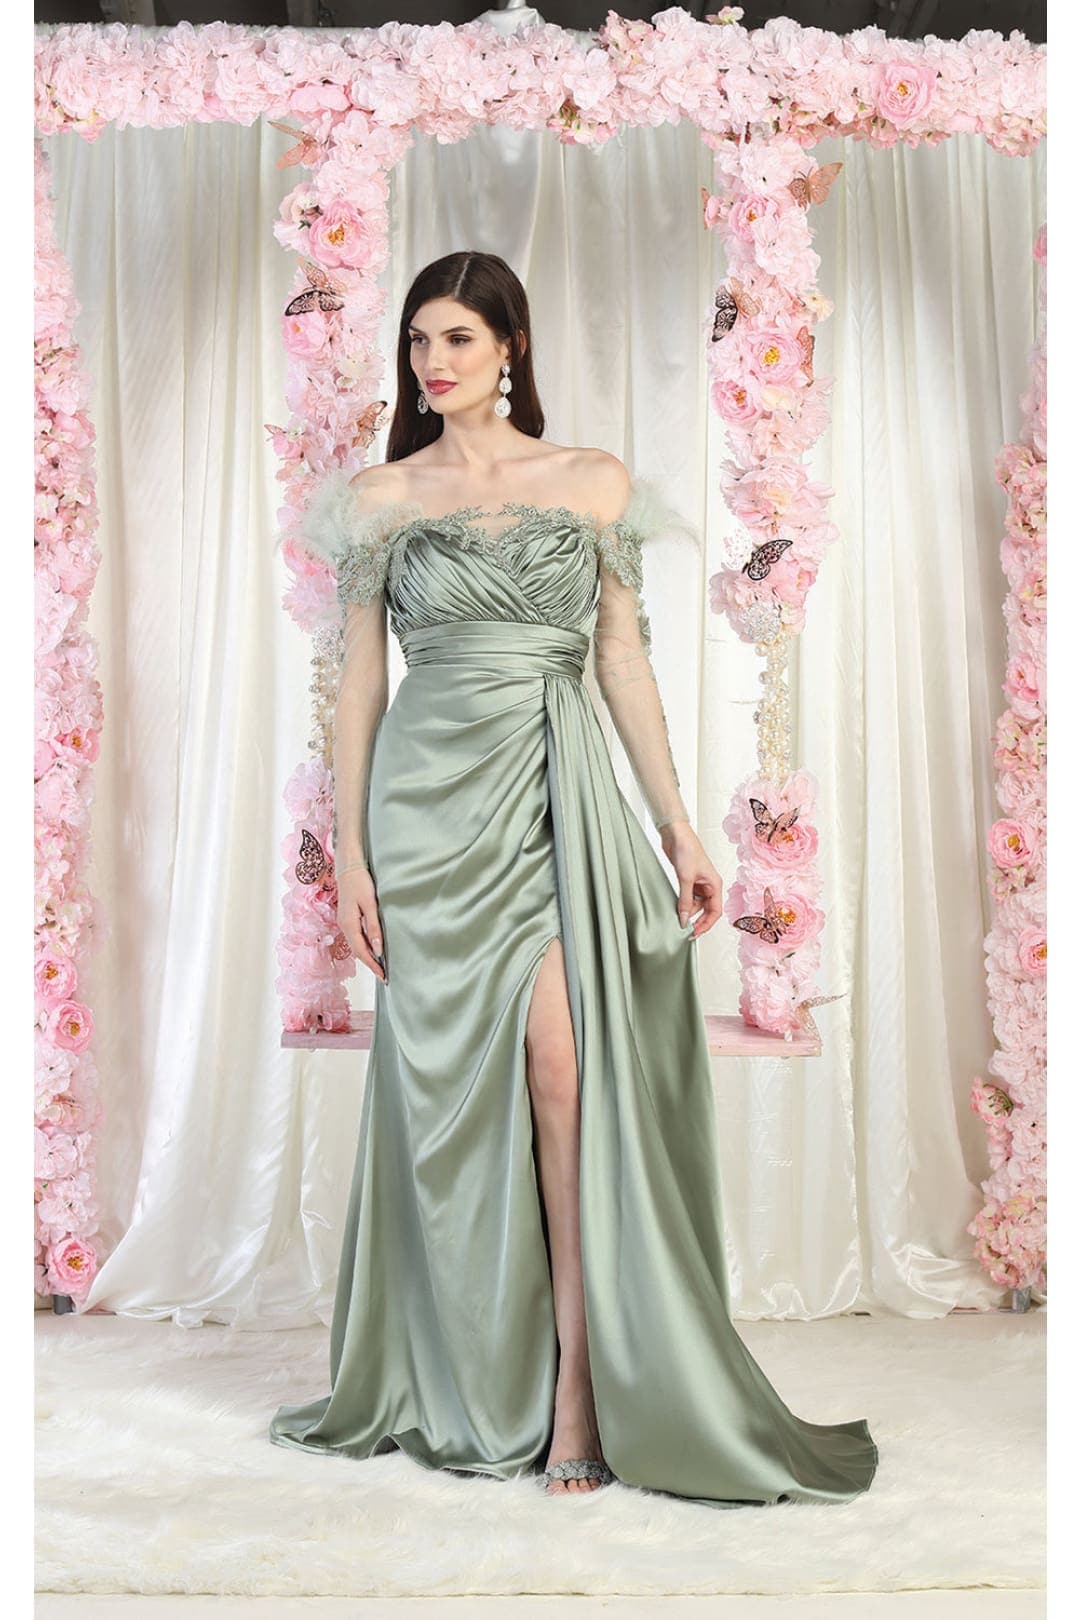 Royal Queen RQ8002 Sheer Sleeves Formal Gown - SAGE / 4 - Dress